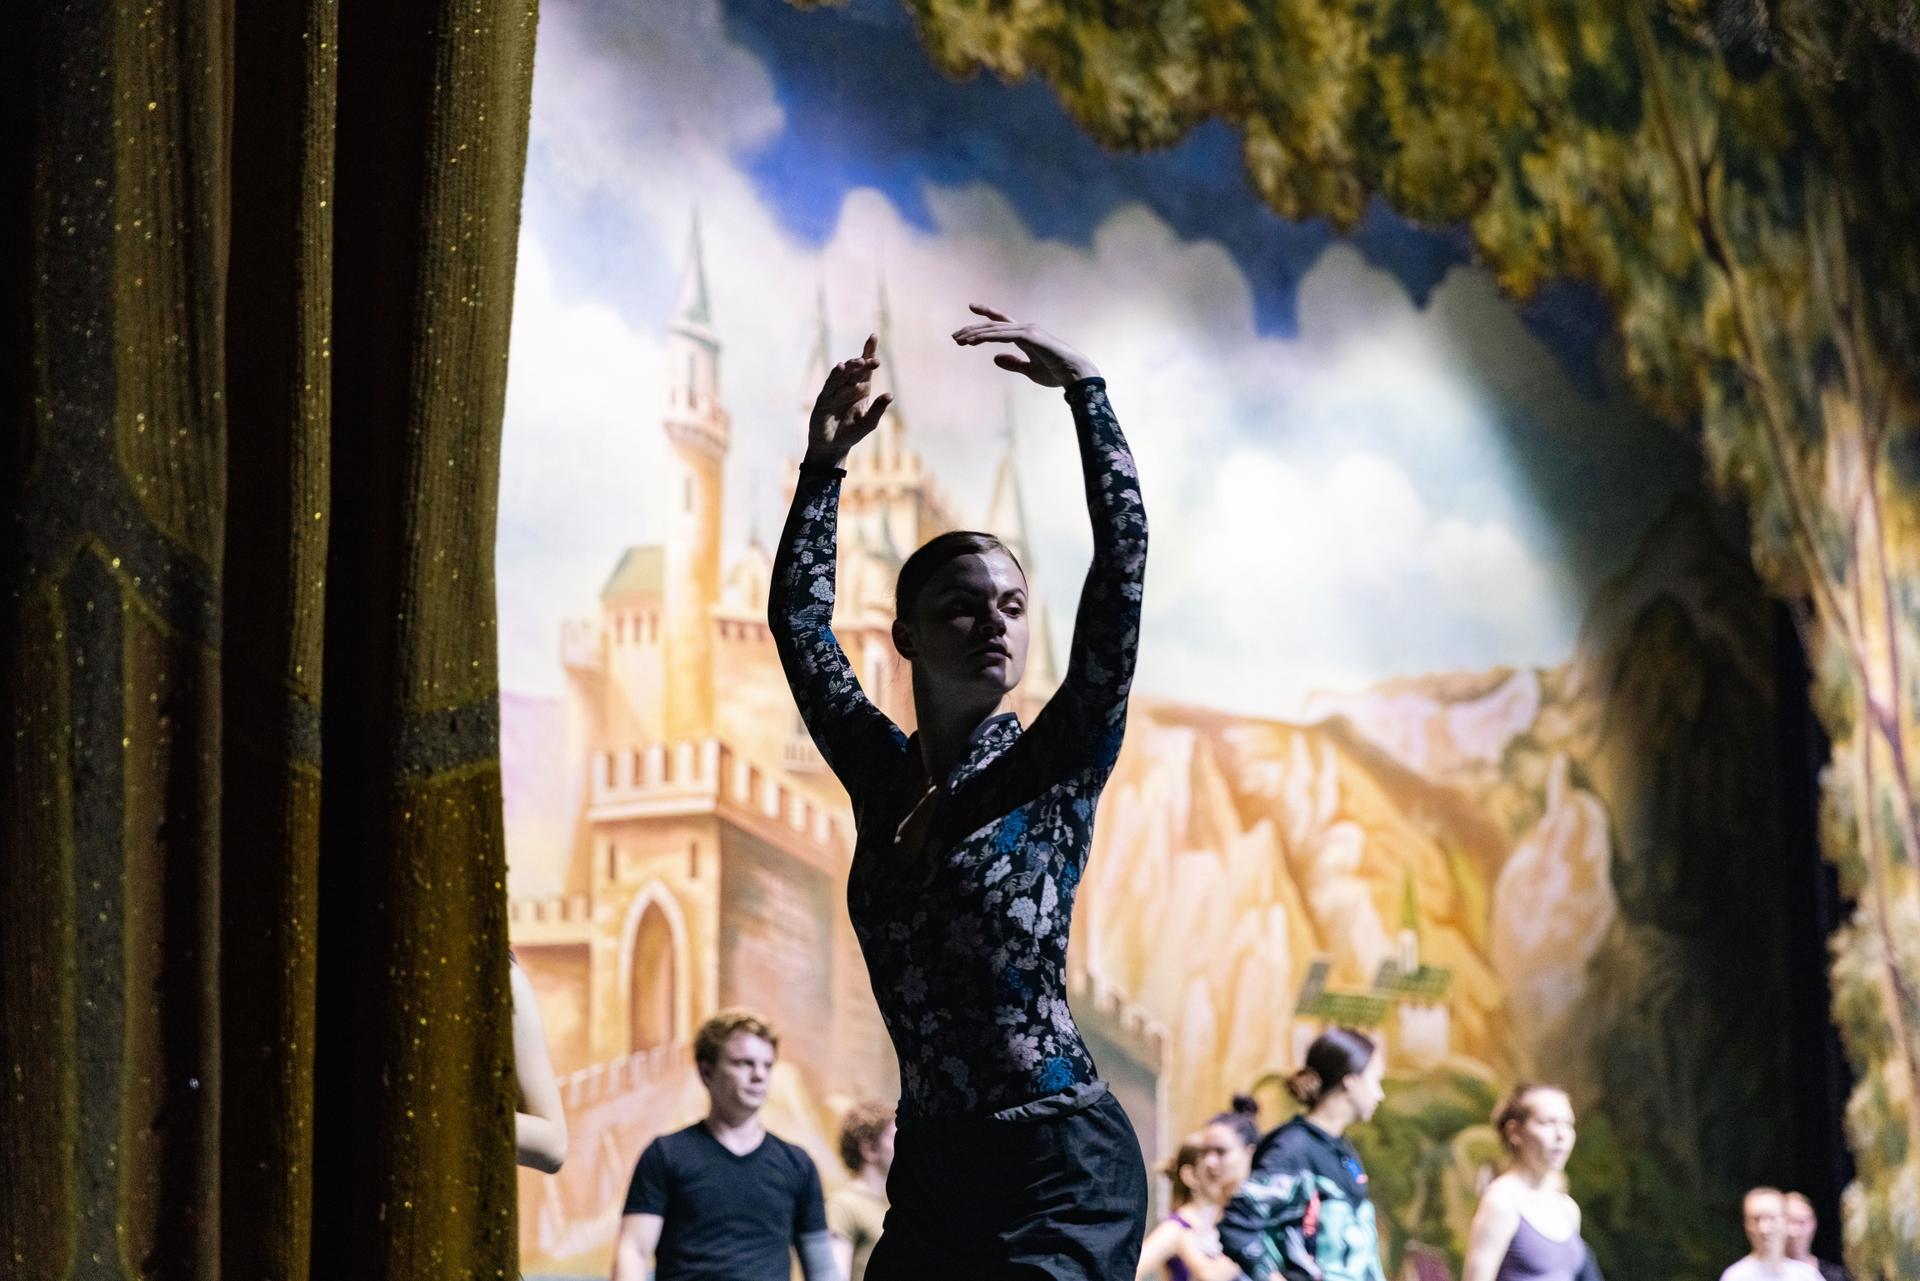 dancers rehearse onstage with a backdrop